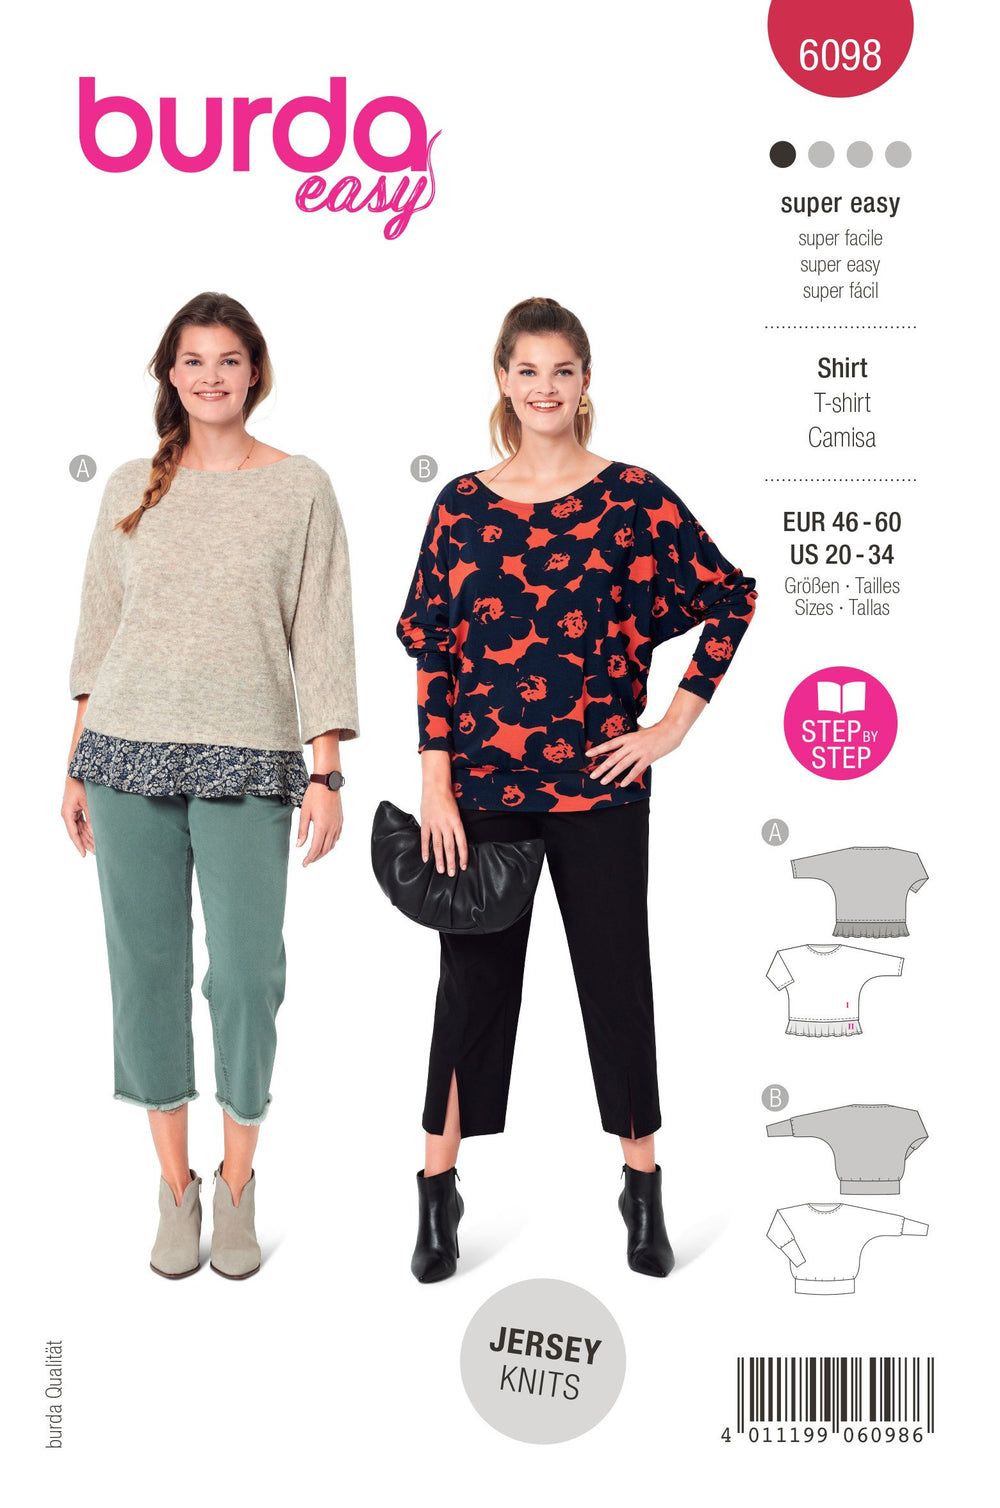 Burda Sewing Pattern 6098 Top with Kimono Sleeves from Jaycotts Sewing Supplies